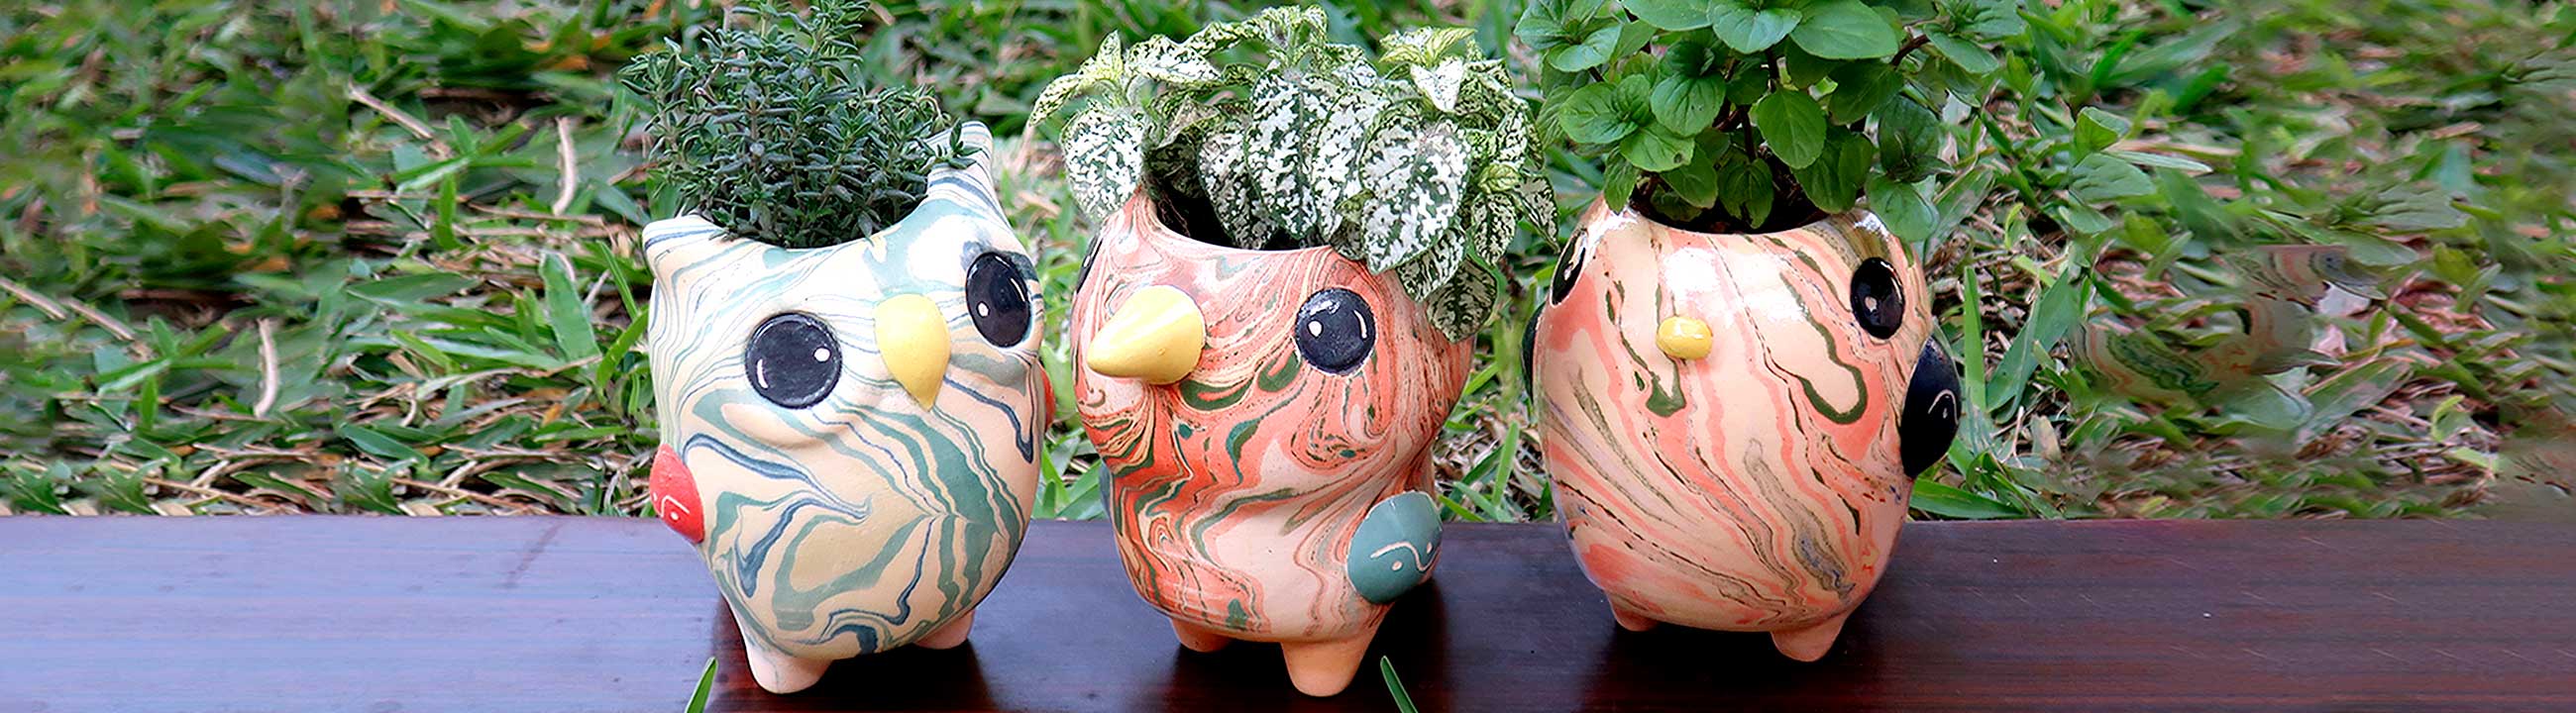 gifts for garden lovers